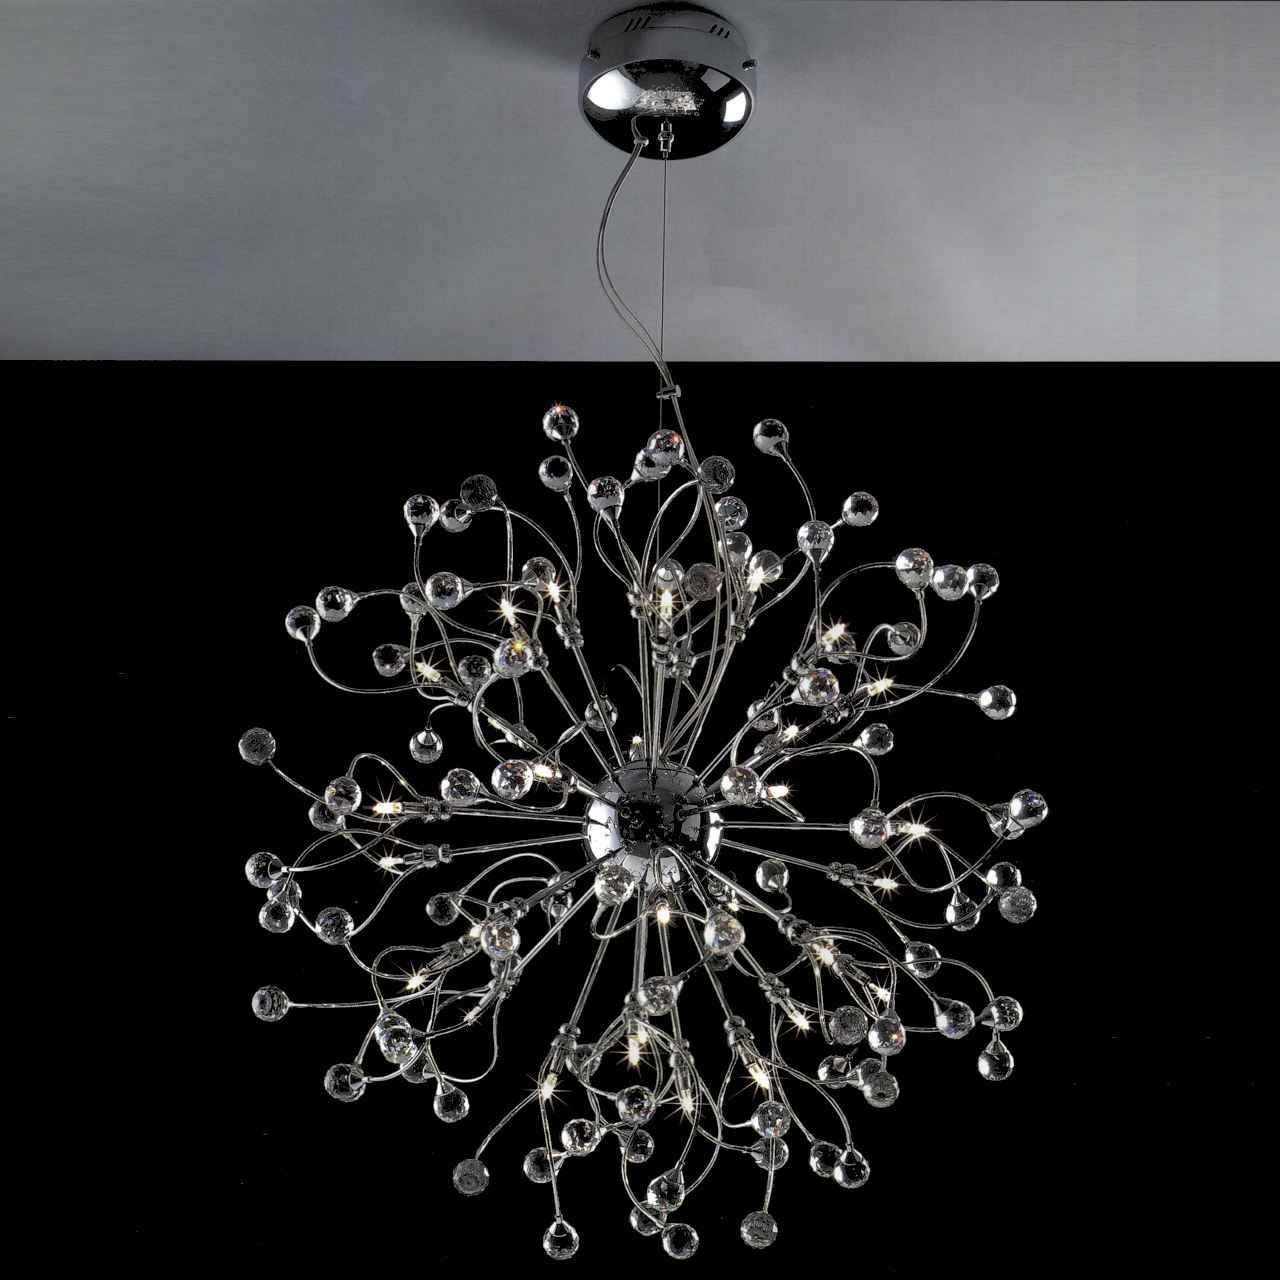 Brizzo Lighting Stores 30 Sfera Modern Crystal Round Chandelier With Modern Chrome Chandeliers (View 3 of 12)